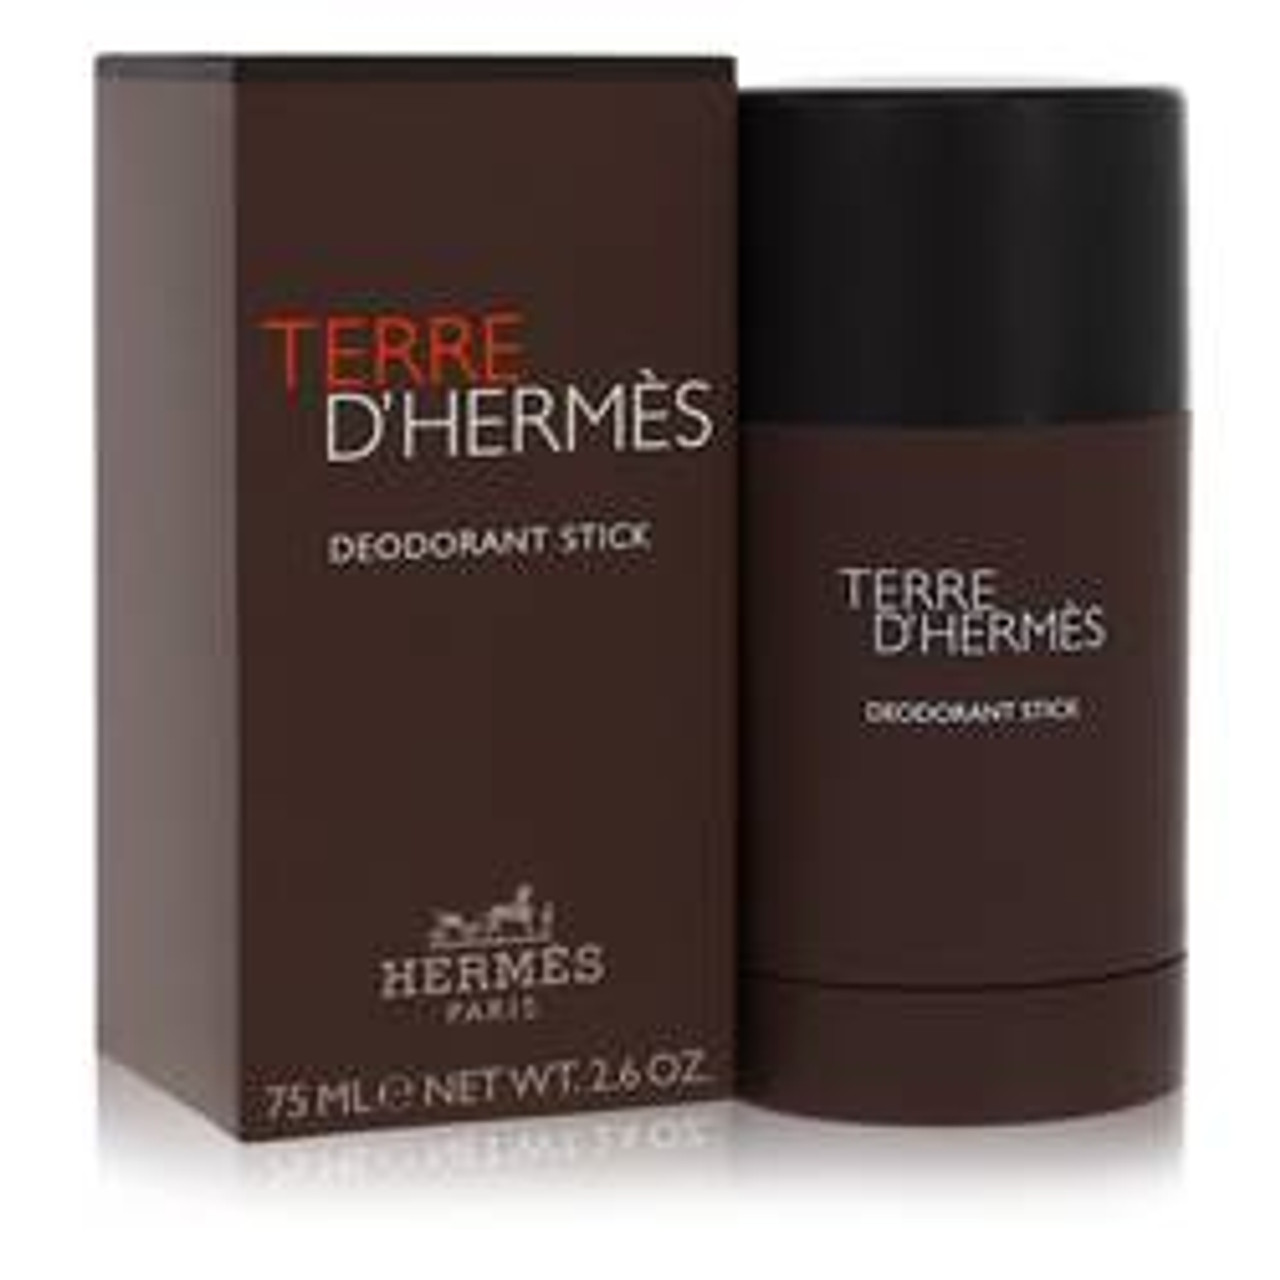 Terre D'hermes Cologne By Hermes Deodorant Stick 2.5 oz for Men - [From 156.00 - Choose pk Qty ] - *Ships from Miami